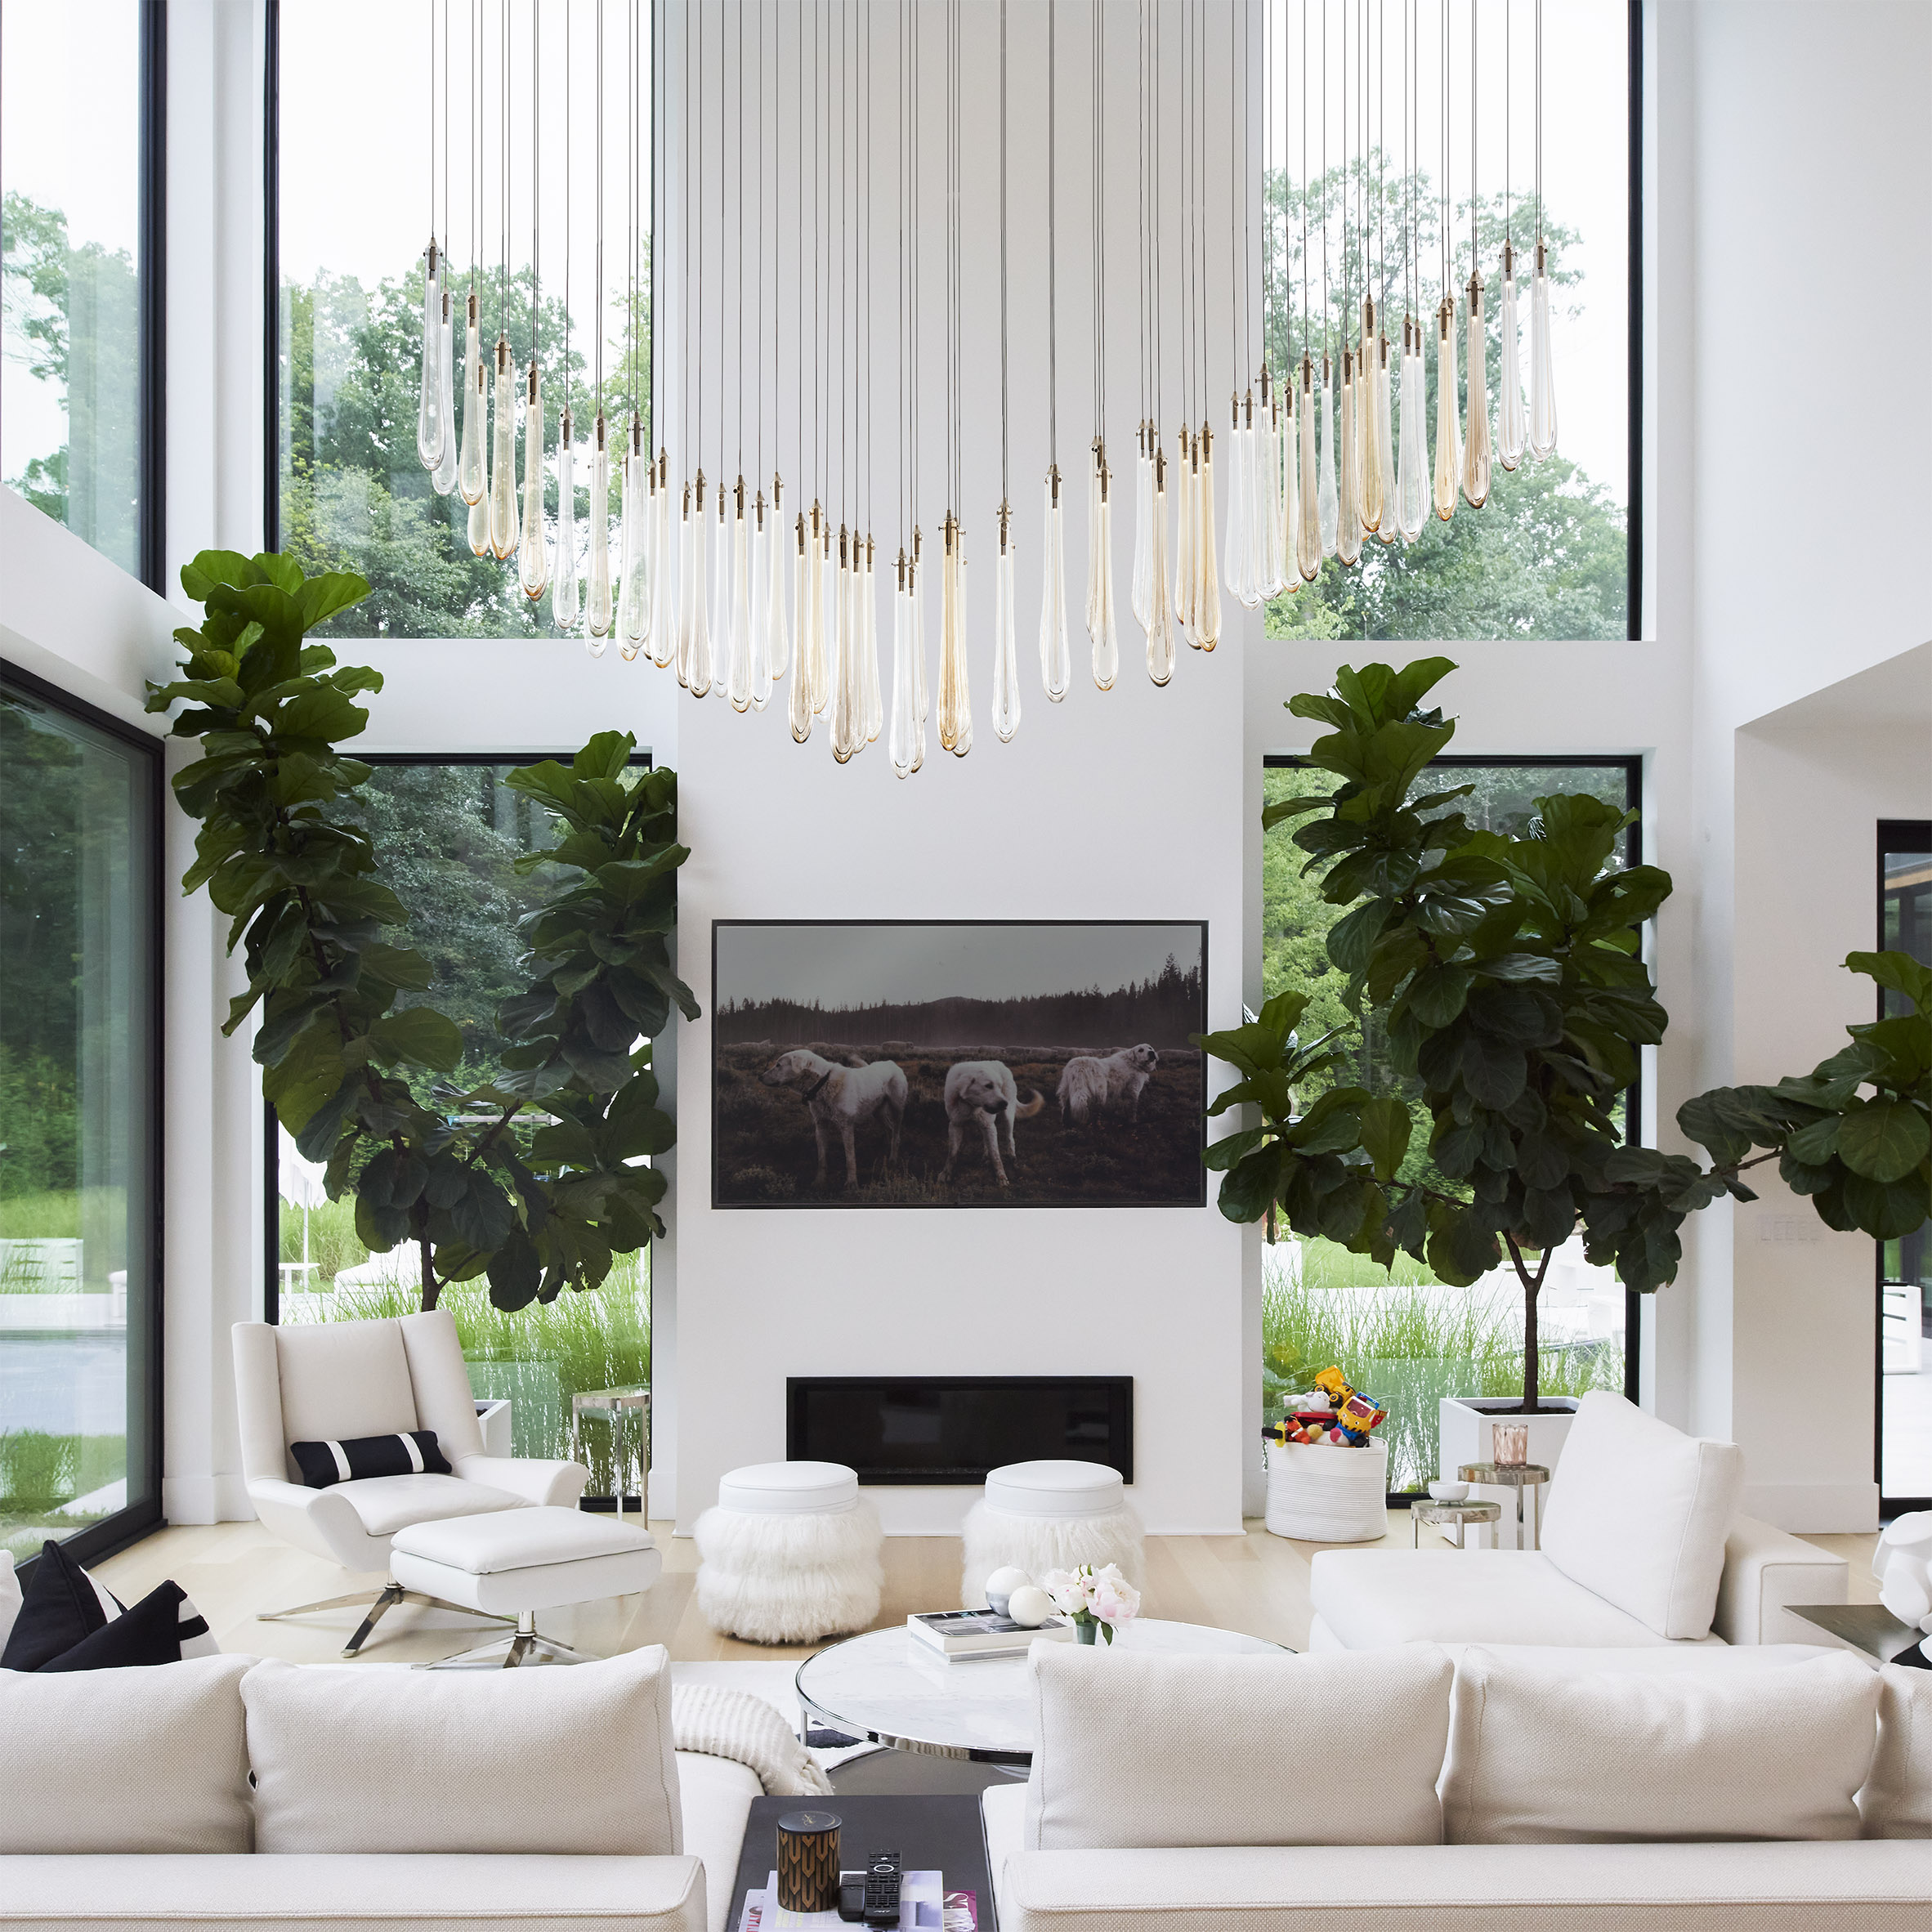 Dew pendant lights hung as a chandelier in a large white living room with tall ceilings